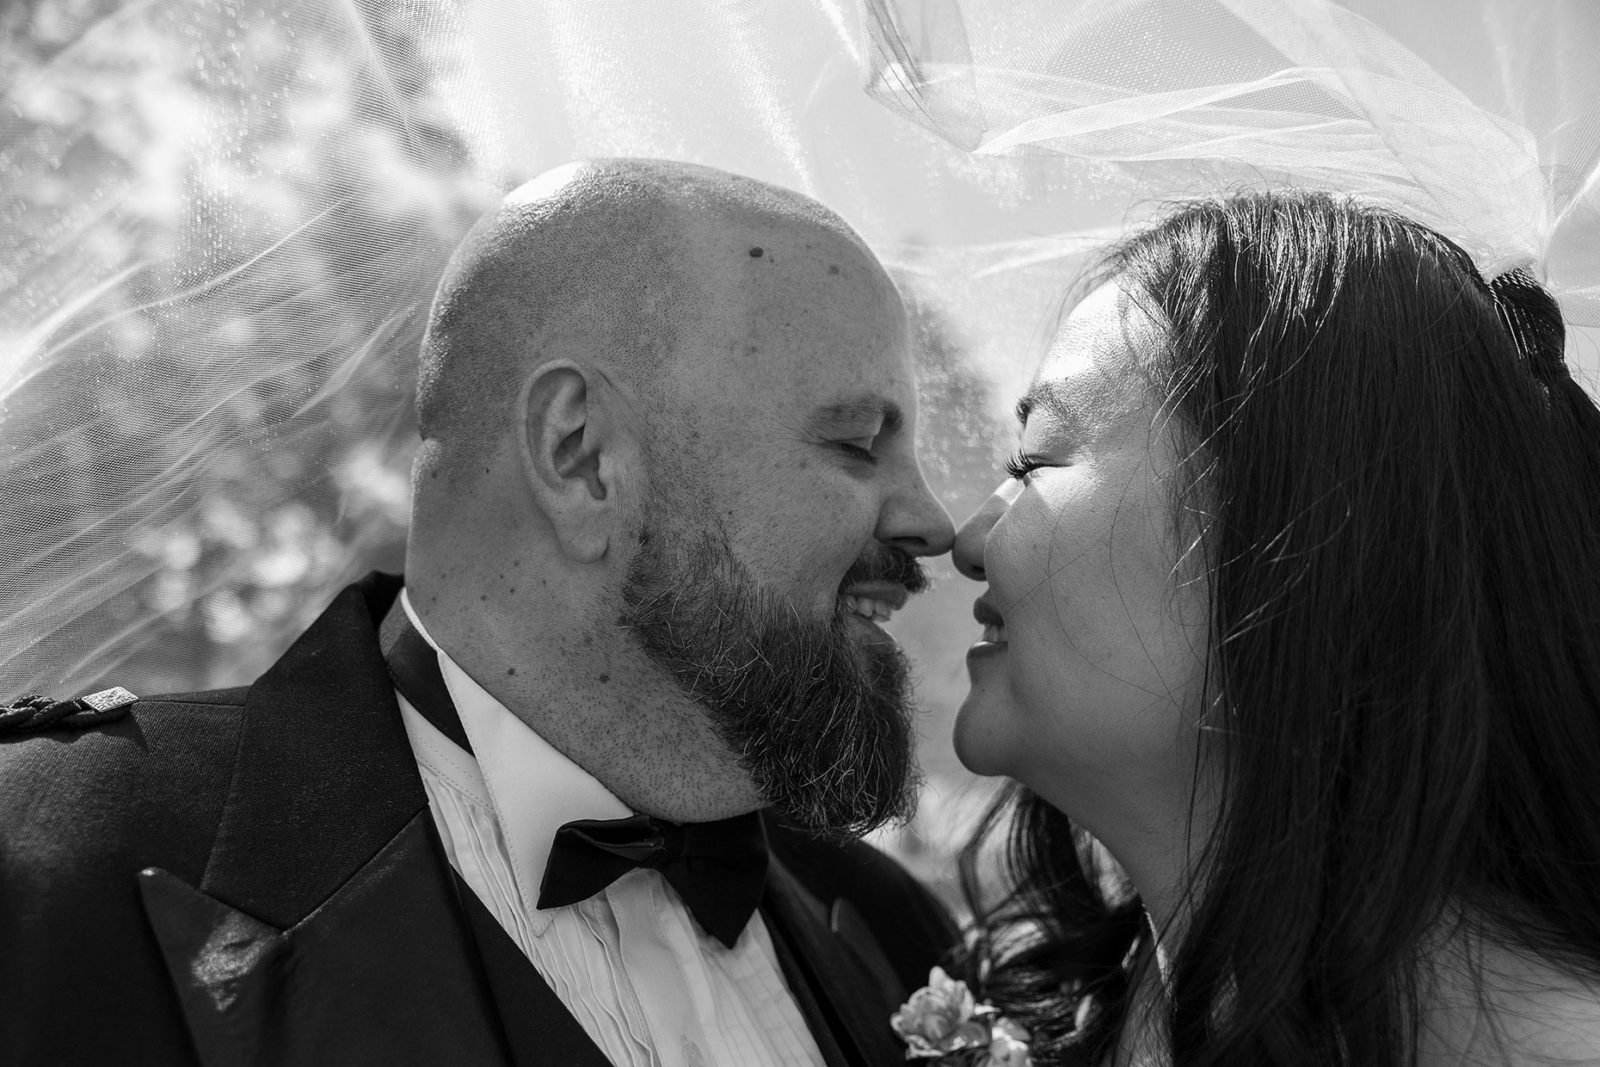 Bride & Groom under veil kissing with noses